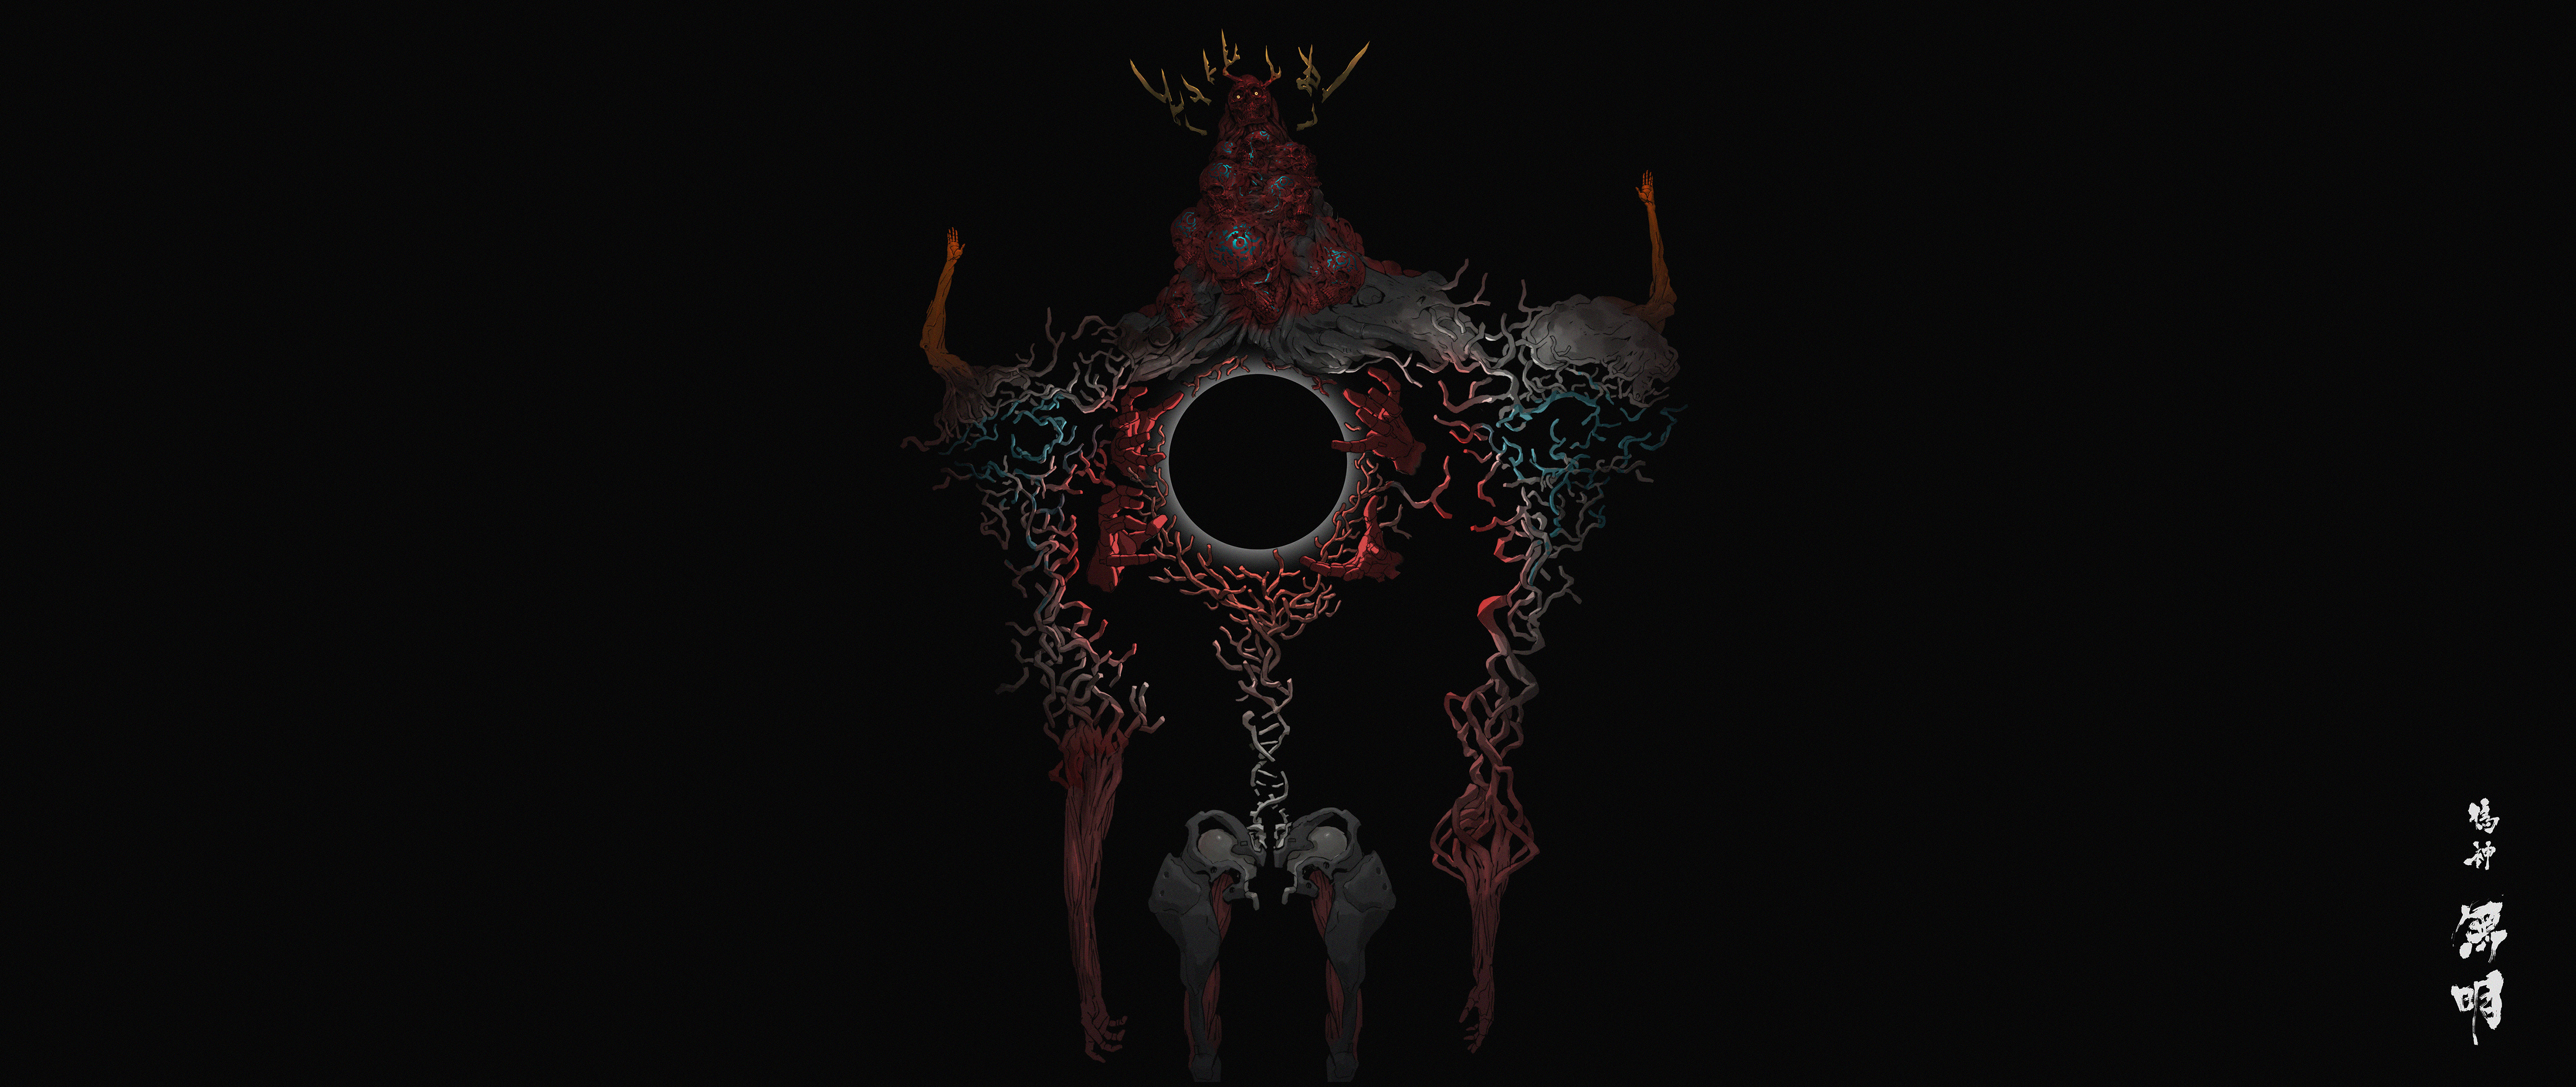 Skull Dead Undead Ching Yeh 5120x2160